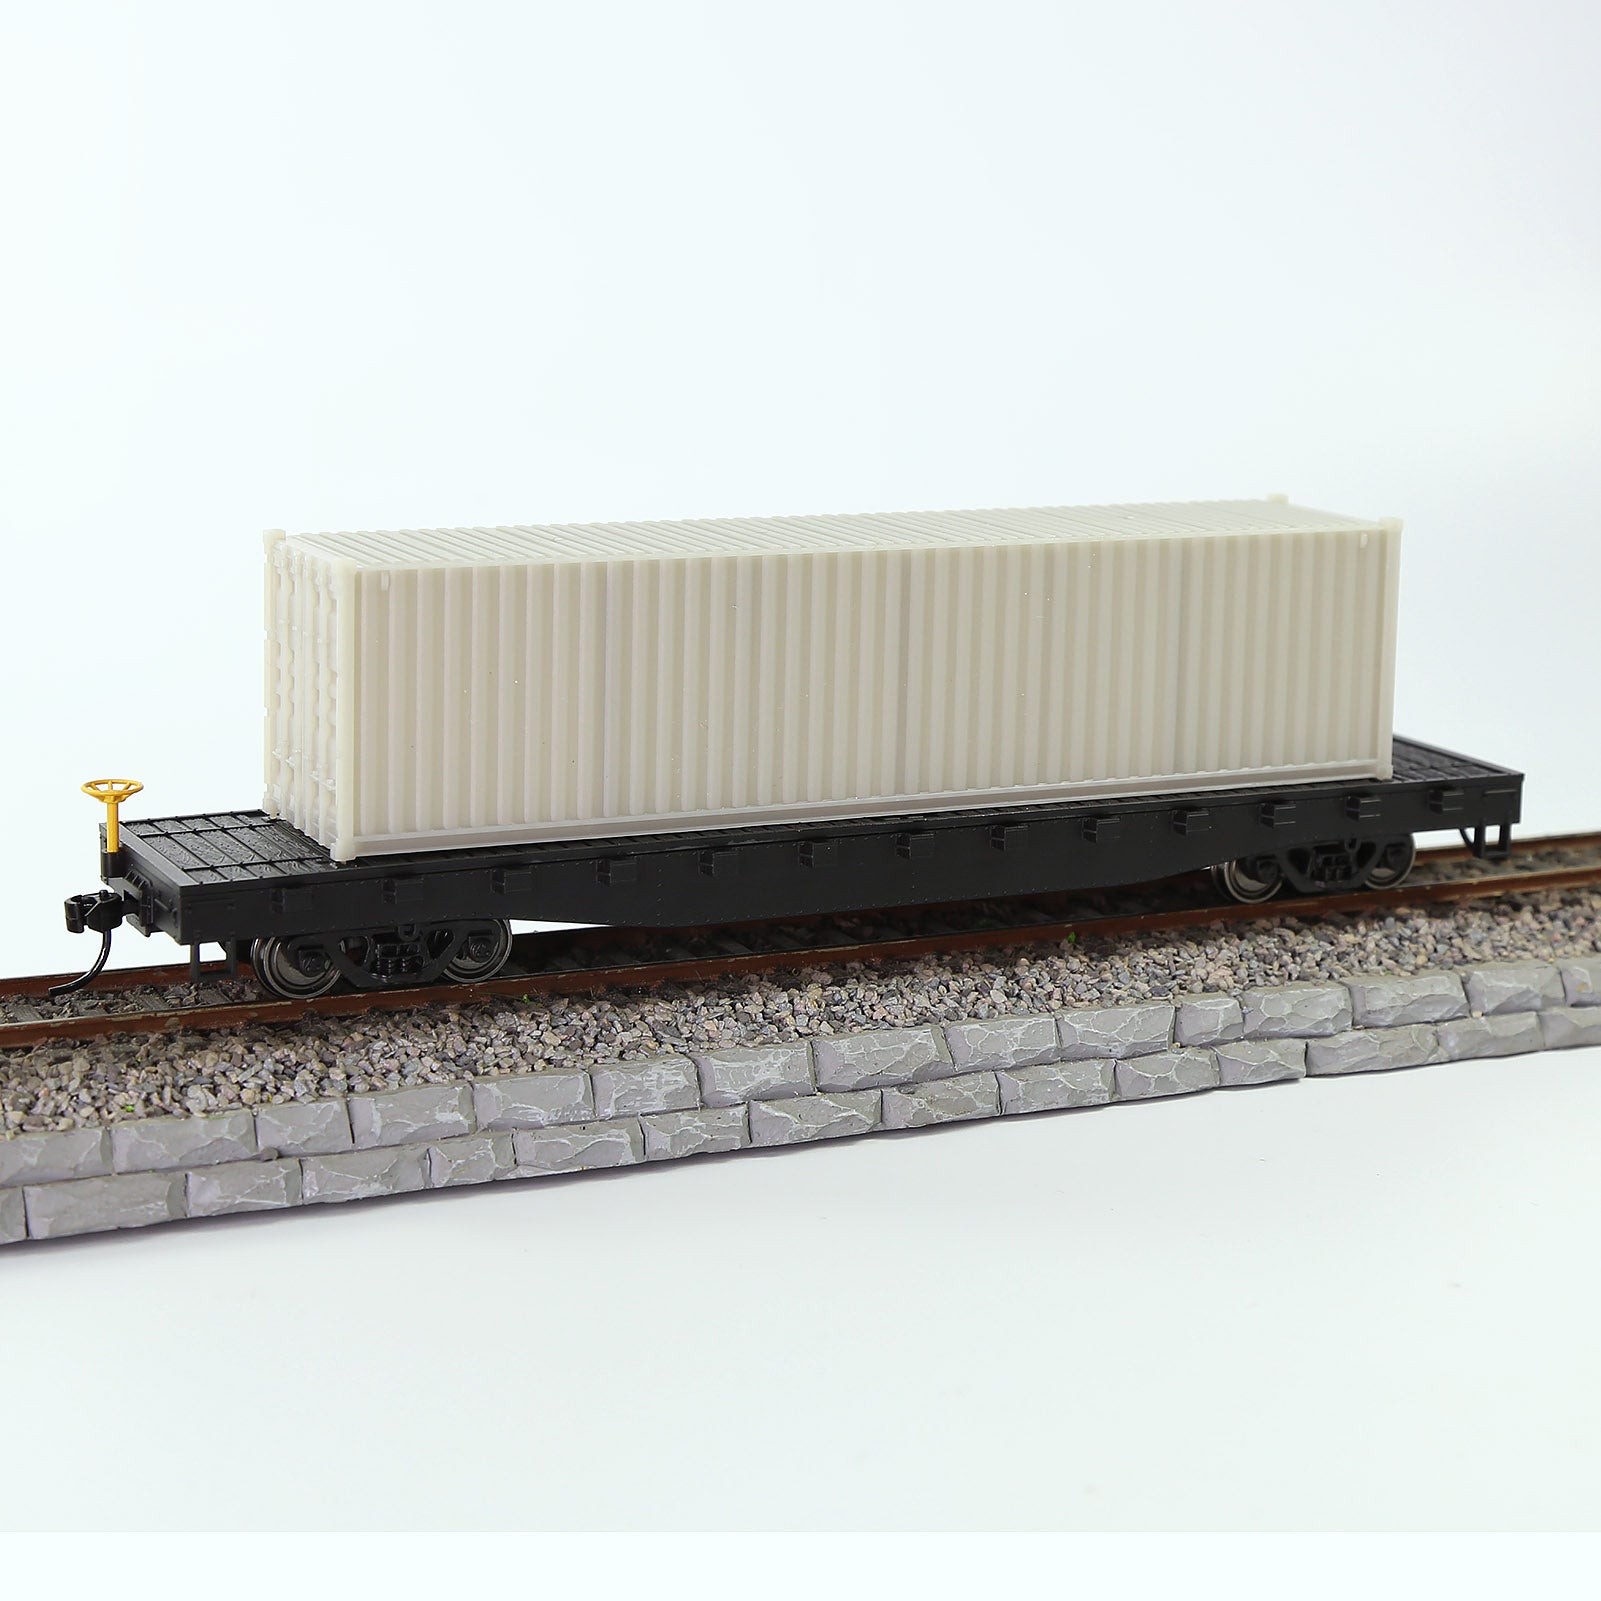 C8740JJ 9pcs HO Scale 1:87 Shipping Container 40ft Blank Uncolored 40' Cargo Box